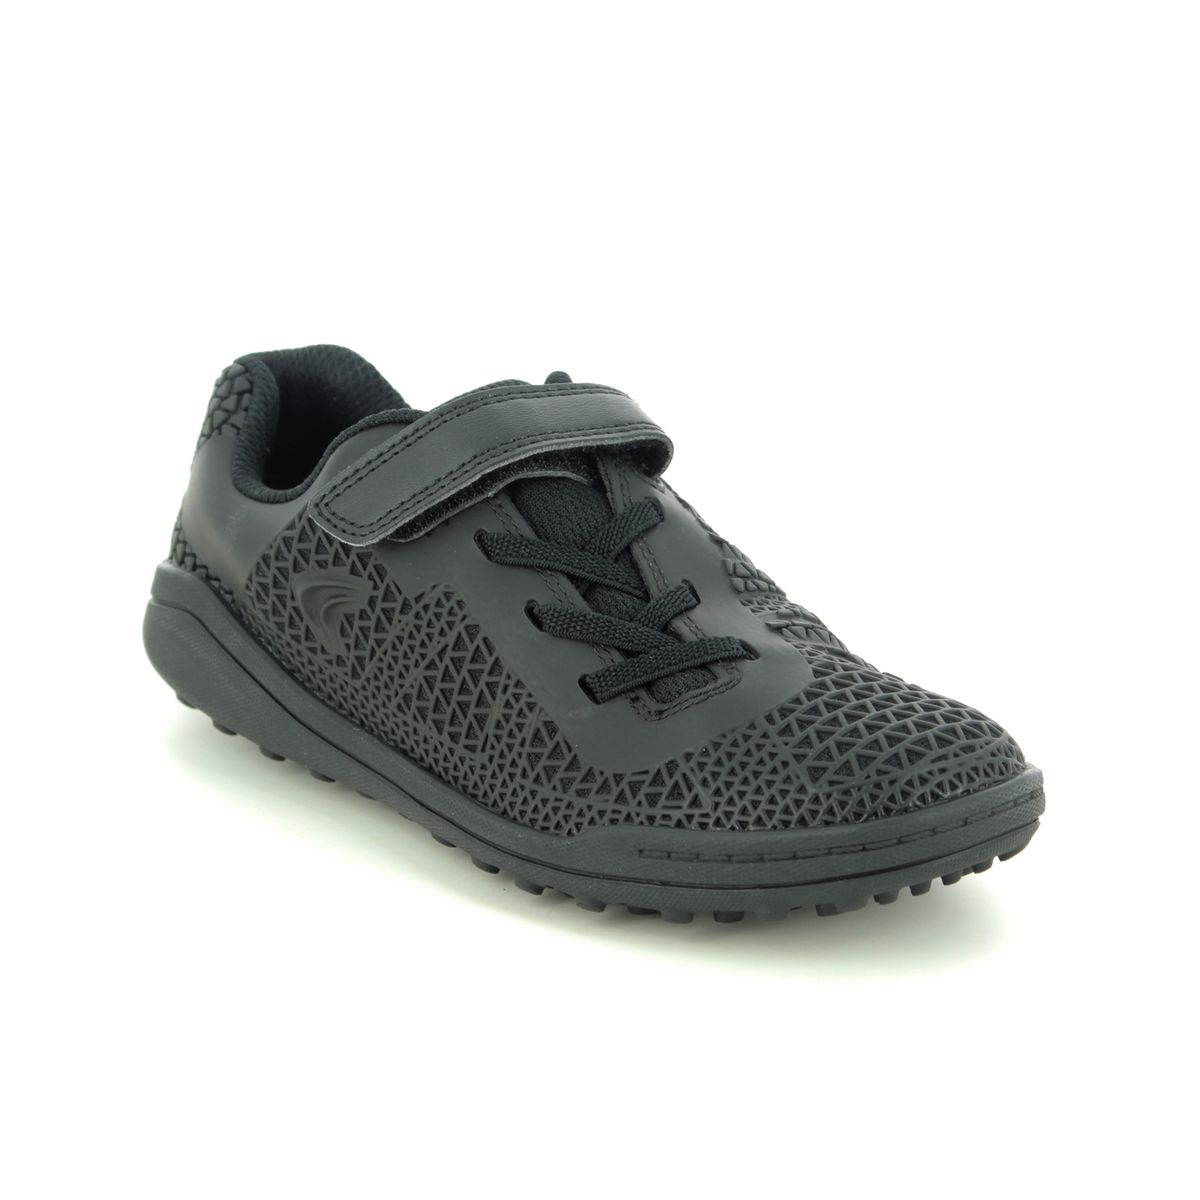 clarks trainers for boys